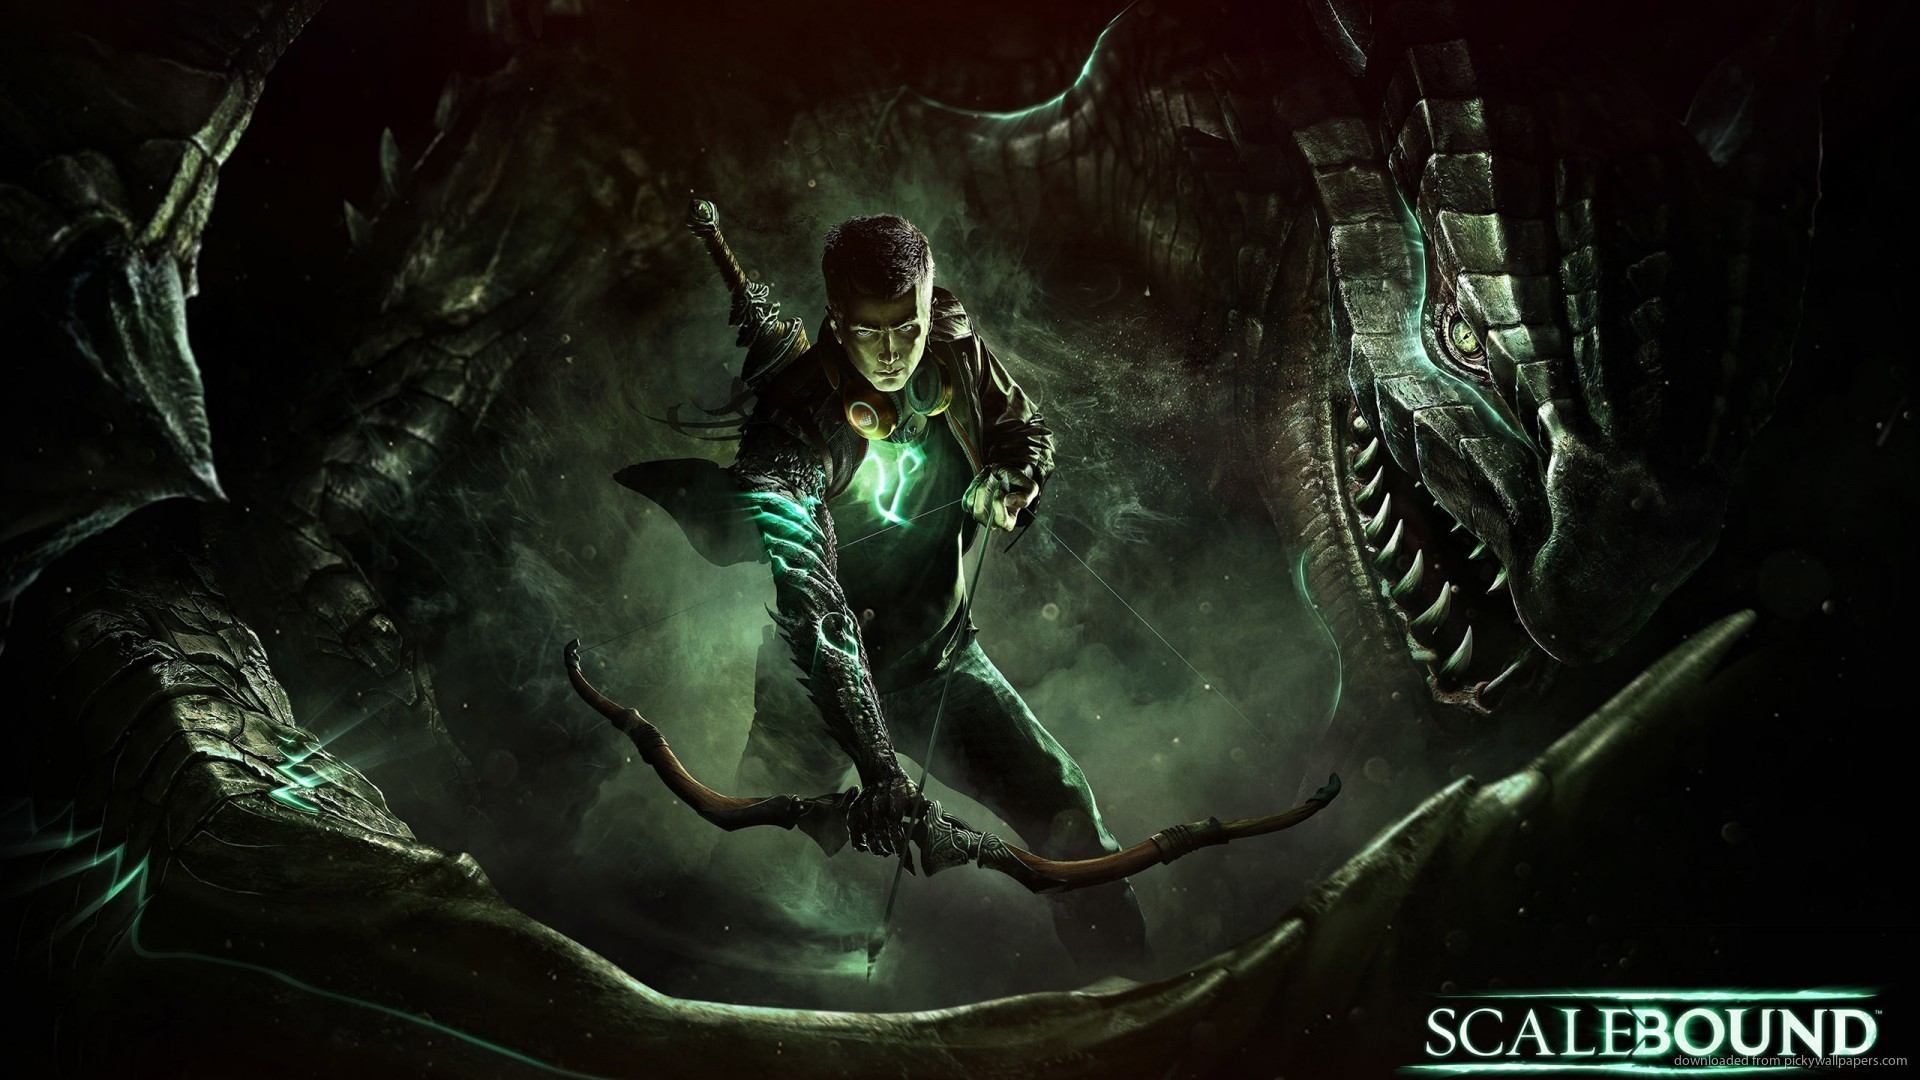 1920x1080 Scalebound Video Game Wallpaper picture